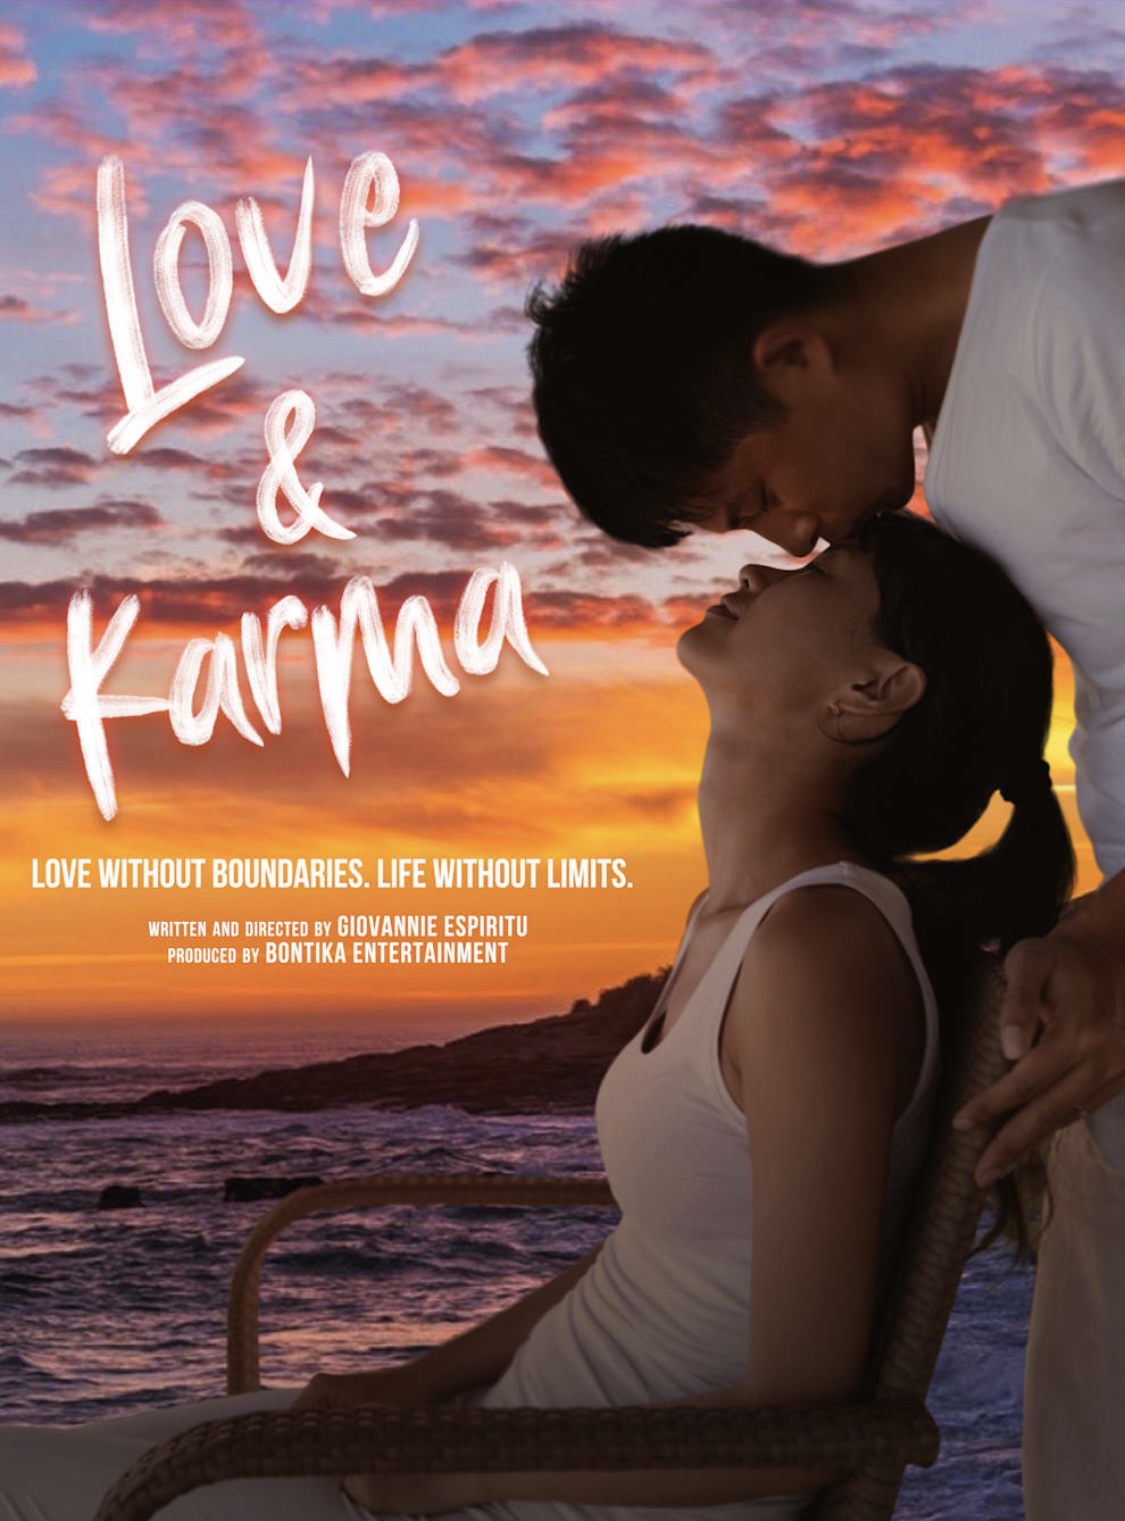 Casting to begin on "Love & Karma," produced by Bontika Entertainment. 